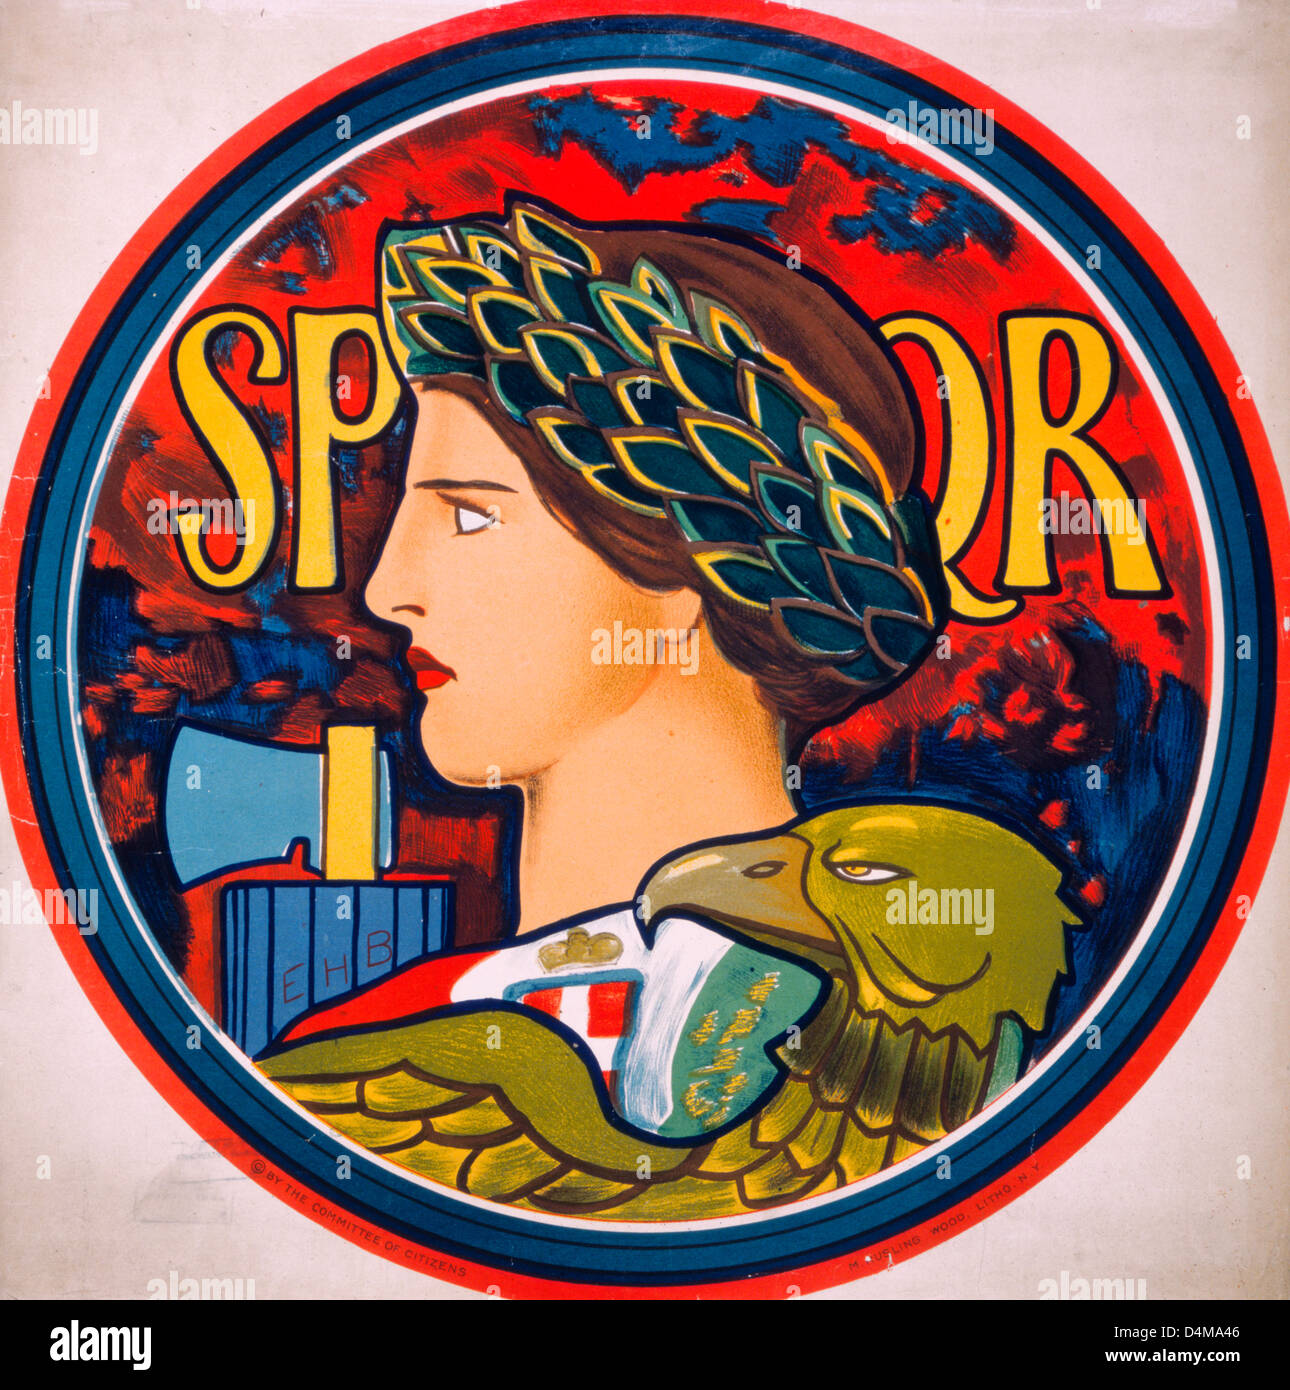 Emblem of Italy - Poster showing personification of Italy, depicted as woman wearing olive wreath in profile within a circular border, circa 1917 Stock Photo